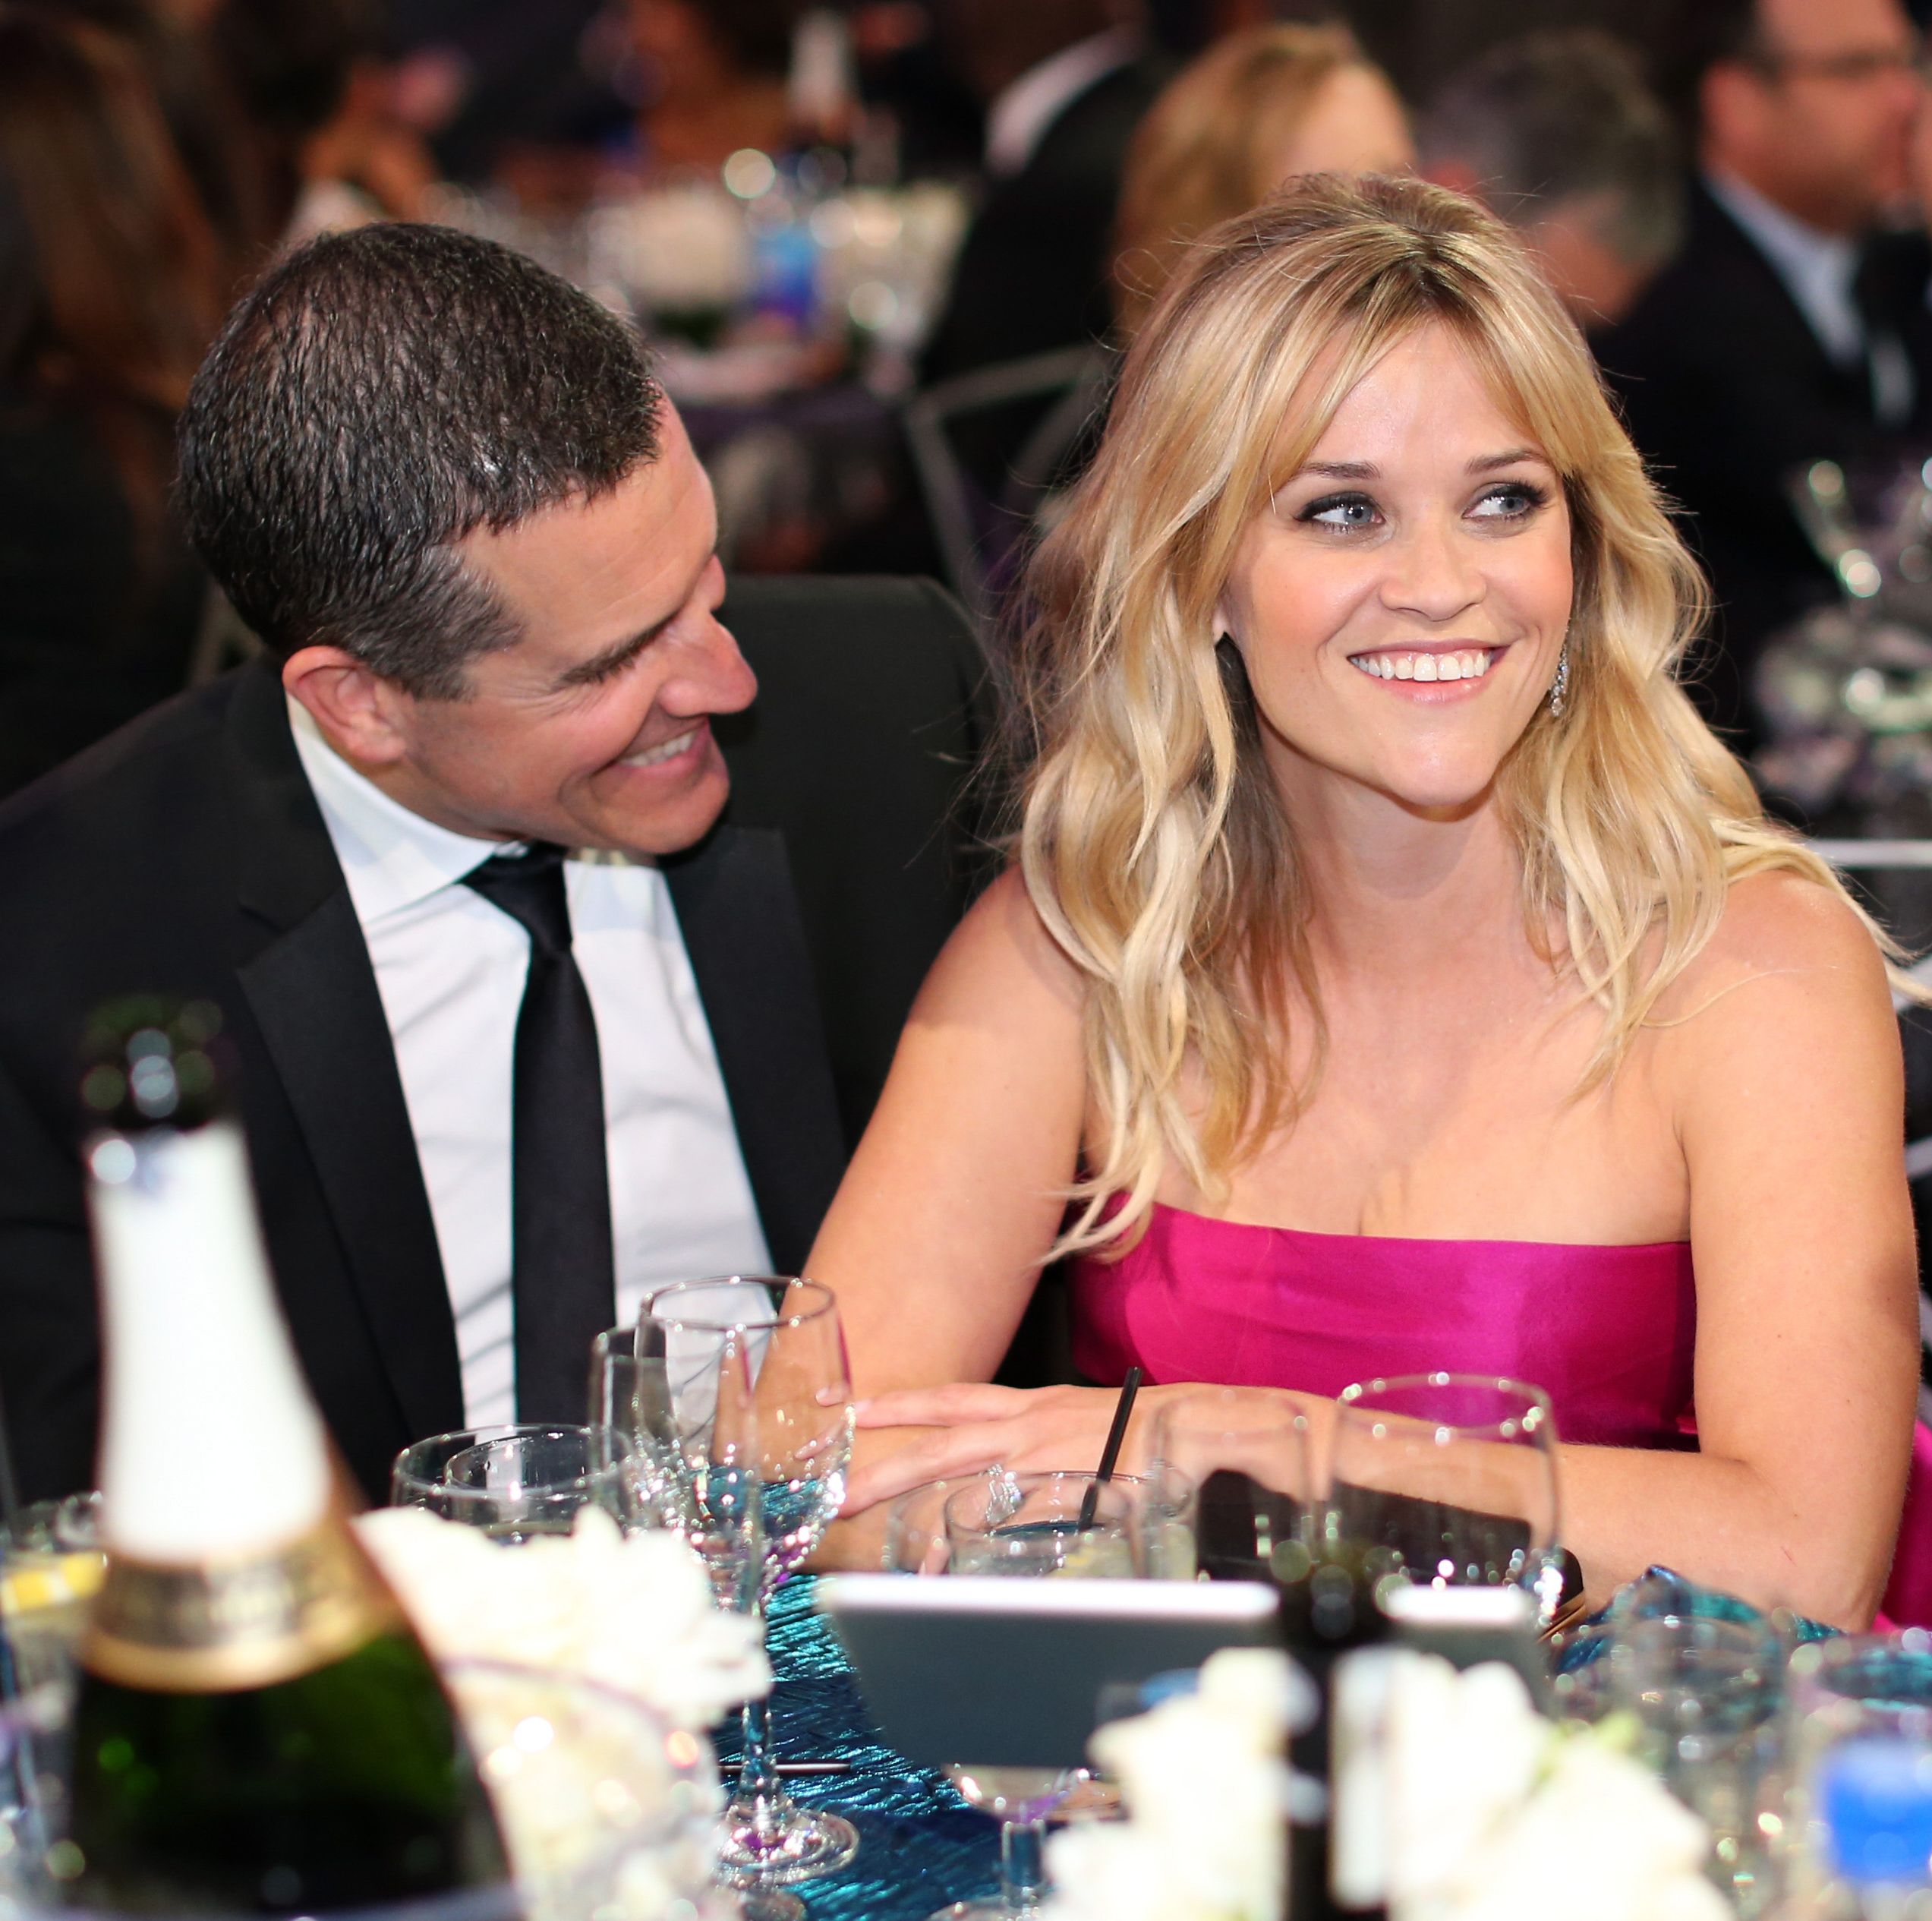 Reese Witherspoon Announces Shocking Divorce From Husband of Nearly 12 Years